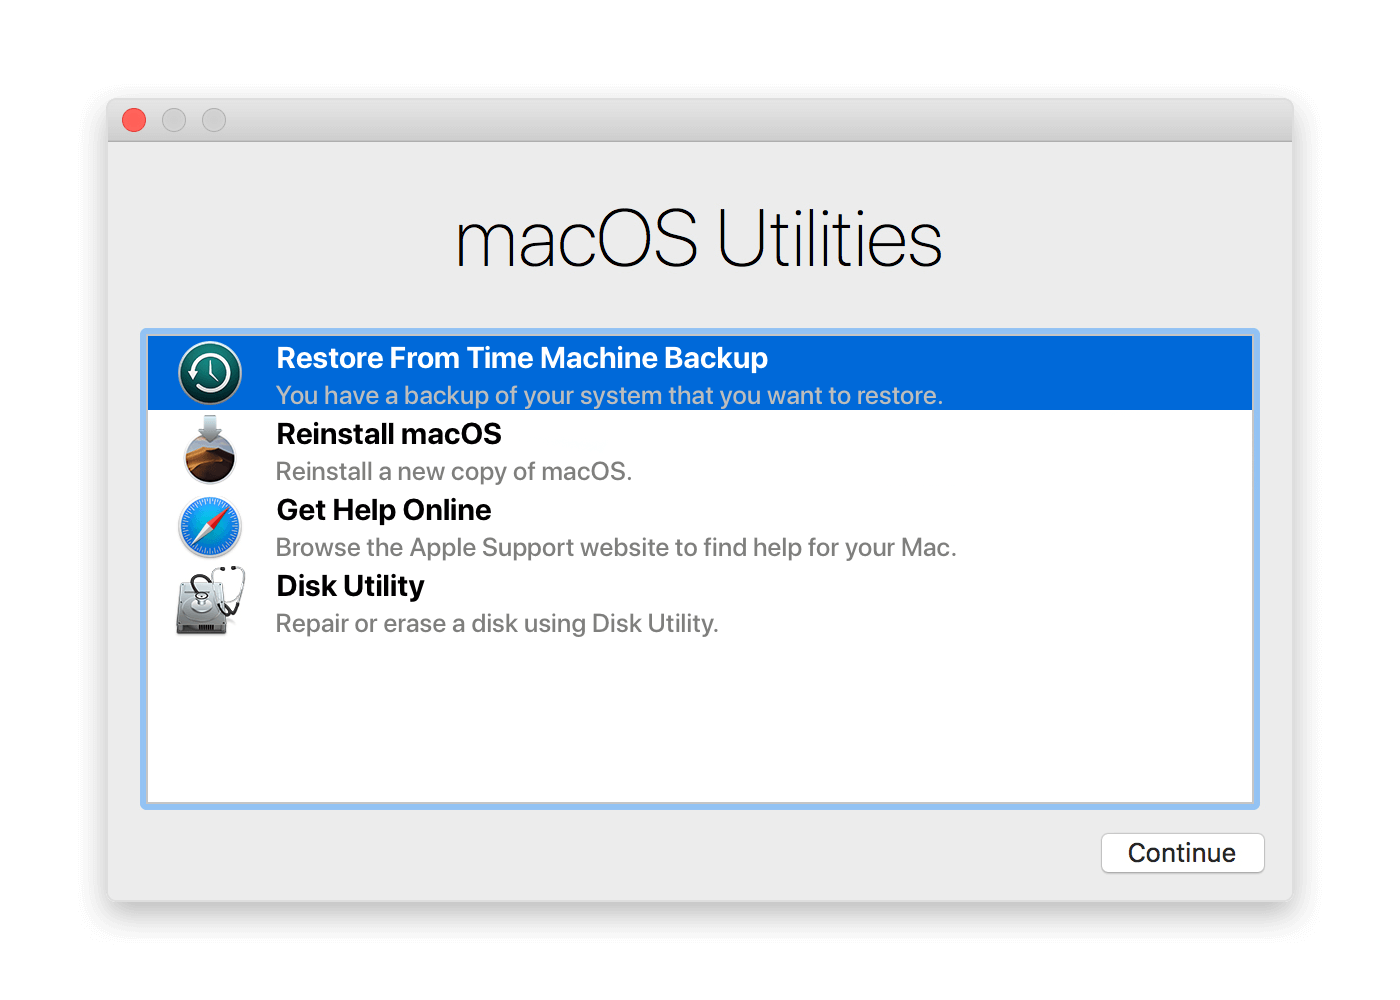 Restore From Time Machine Backup  selected in MacOS Utilities window 